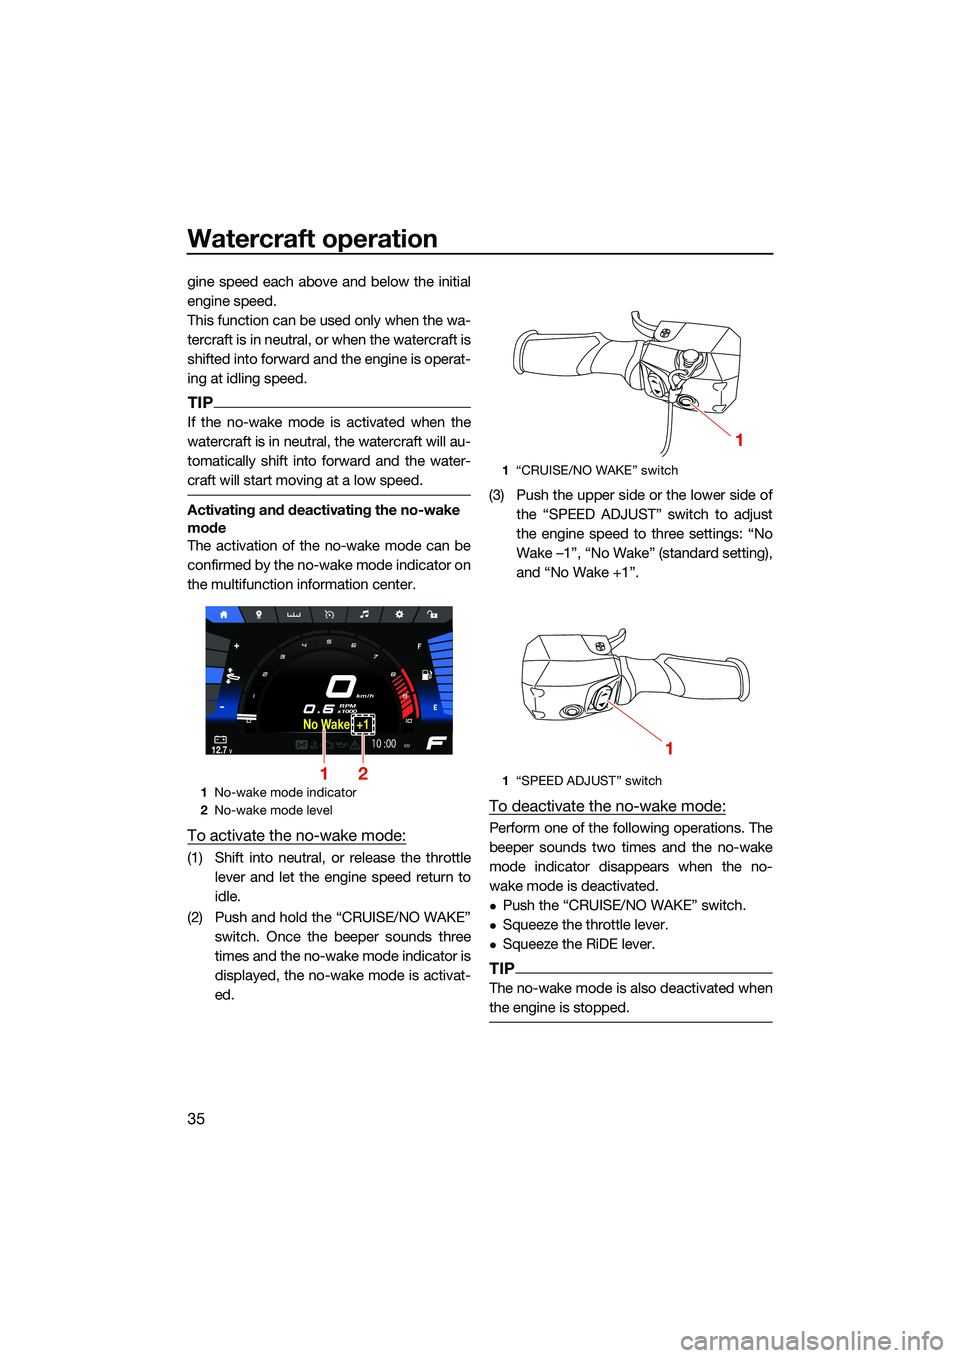 YAMAHA FX HO CRUISER 2022 Service Manual Watercraft operation
35
gine speed each above and below the initial
engine speed.
This function can be used only when the wa-
tercraft is in neutral, or when the watercraft is
shifted into forward and